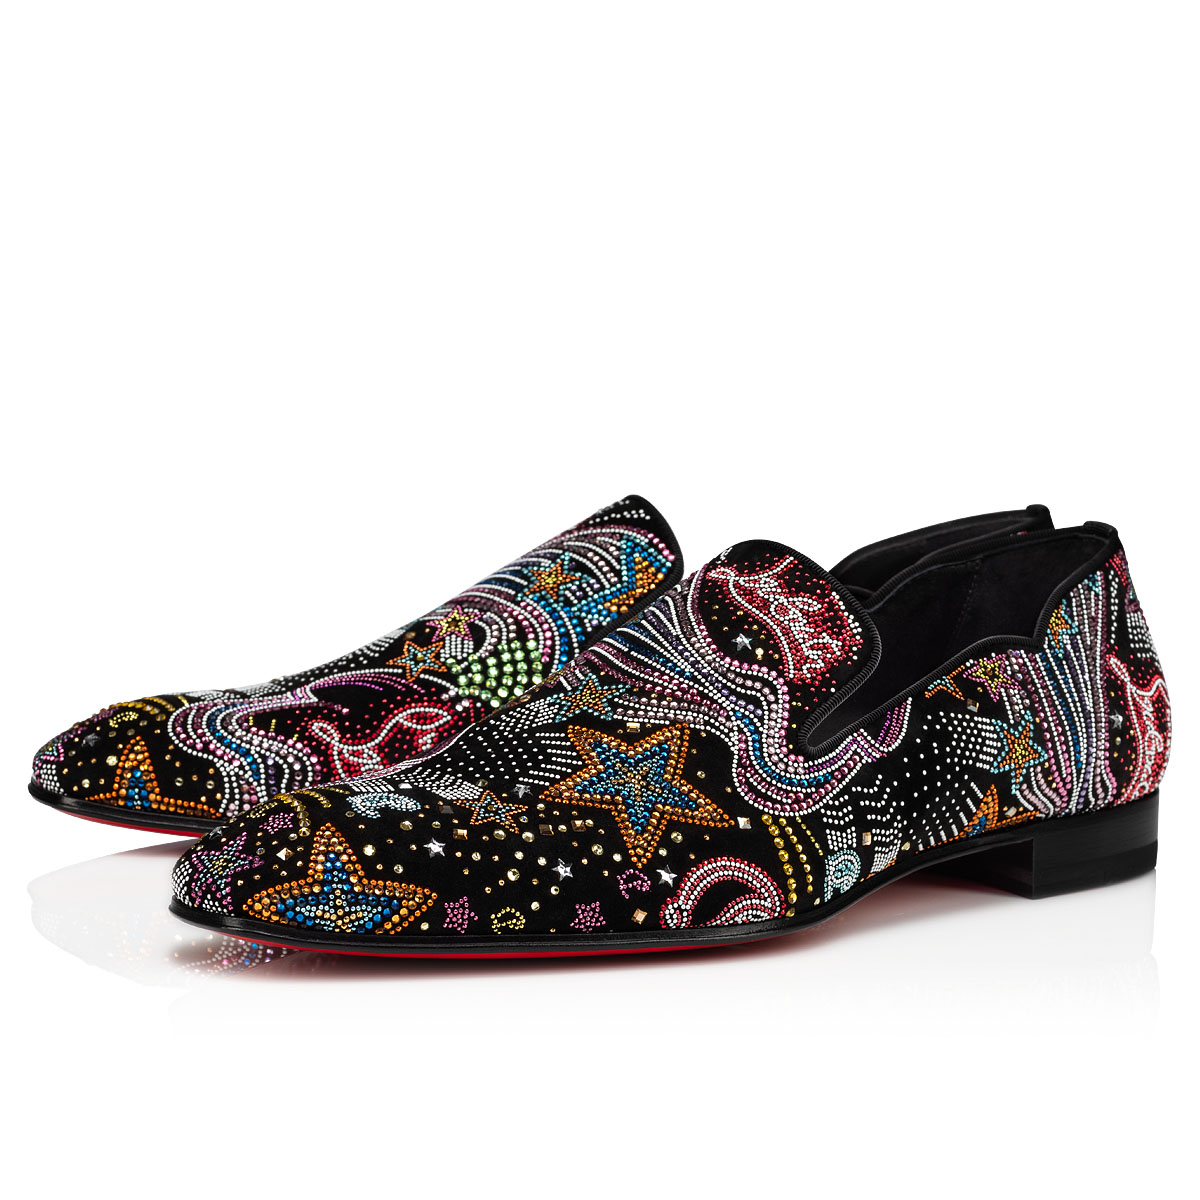 Dandy Starlight - Loafers - Veau velours Starlight embroidery and ...